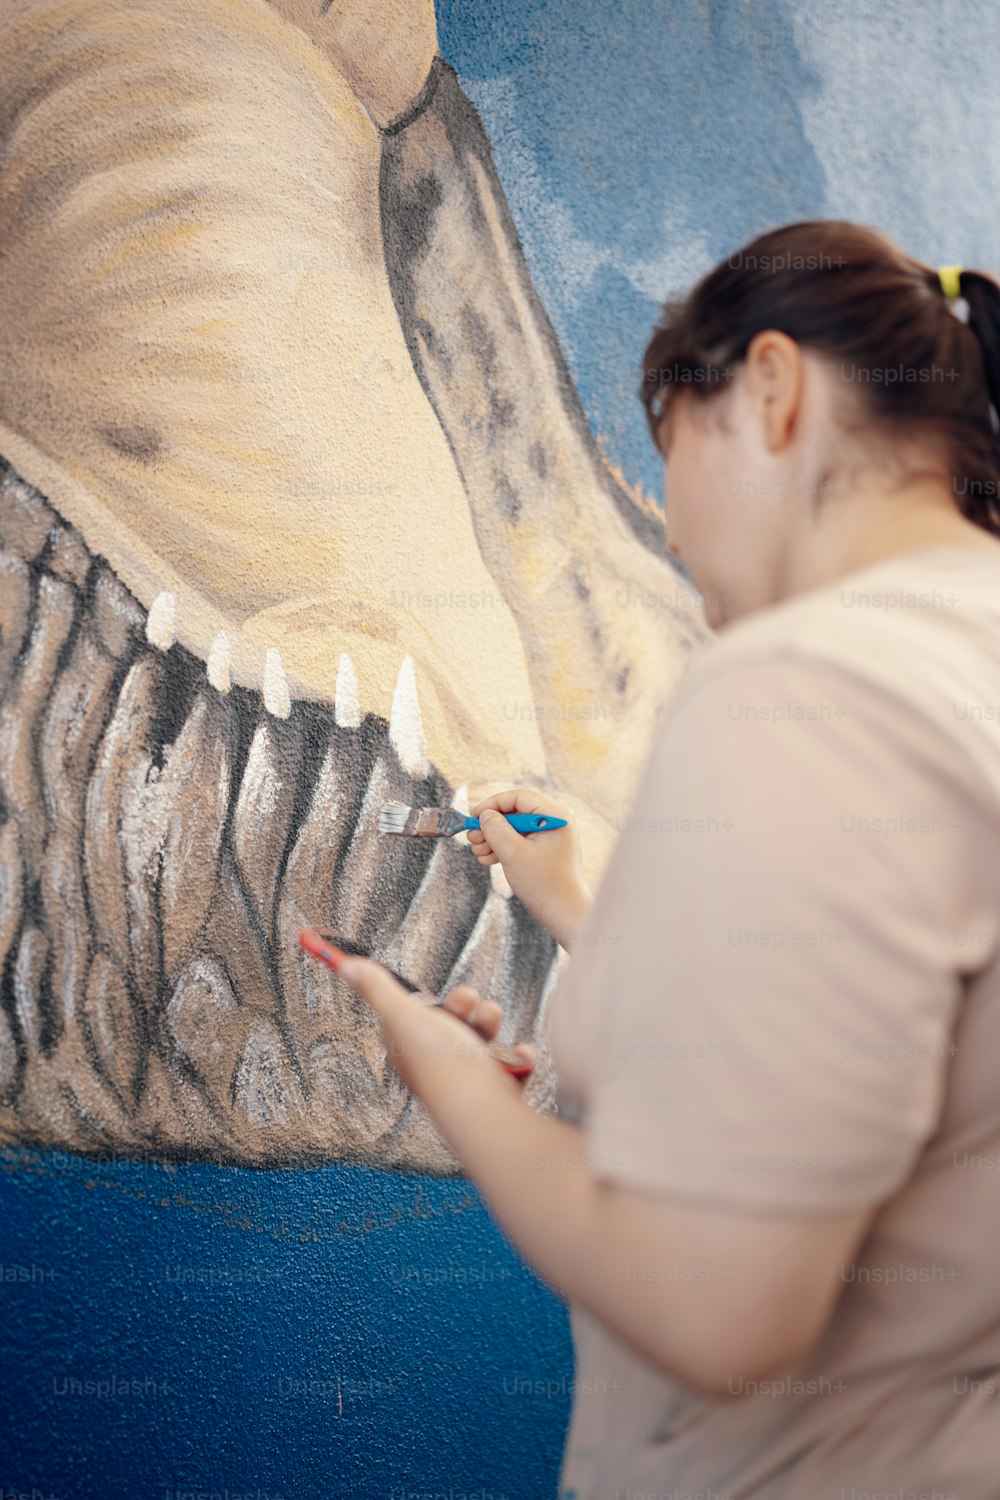 a woman is painting a picture of a dinosaur